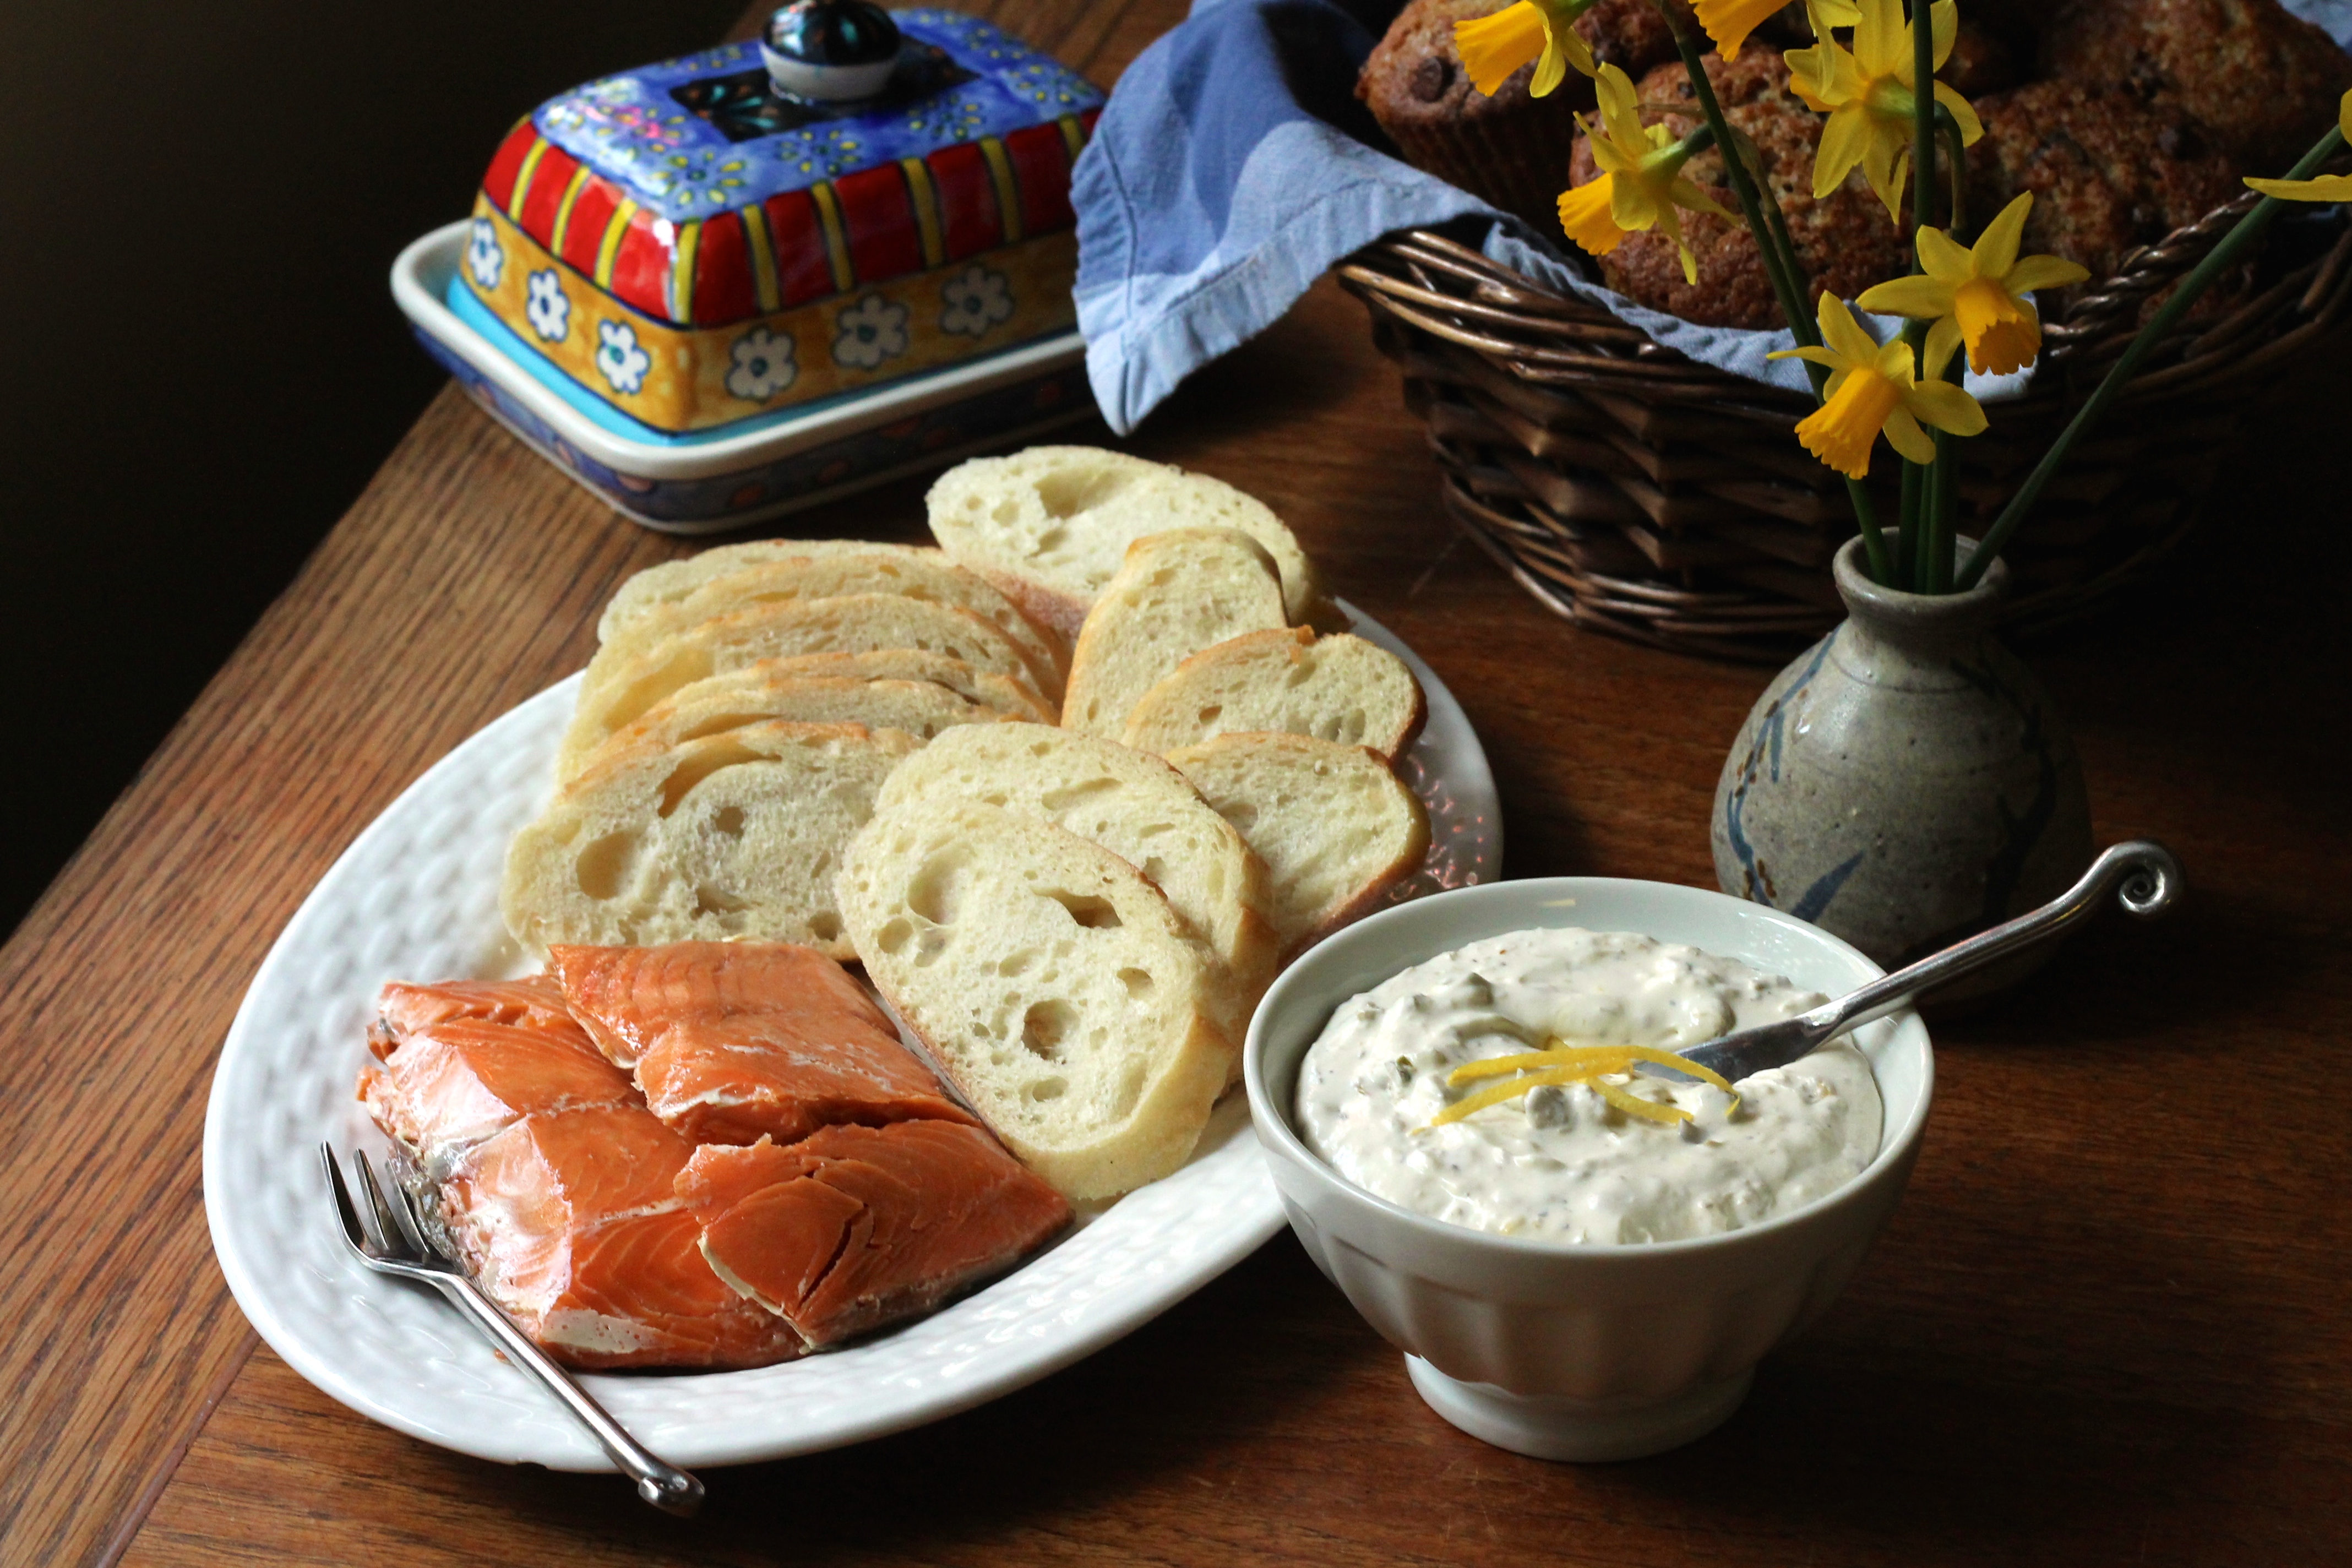 Lemon Caper Cream Cheese with SeaChange Smoked Salmon - perfect for Easter brunch | Korena in the Kitchen